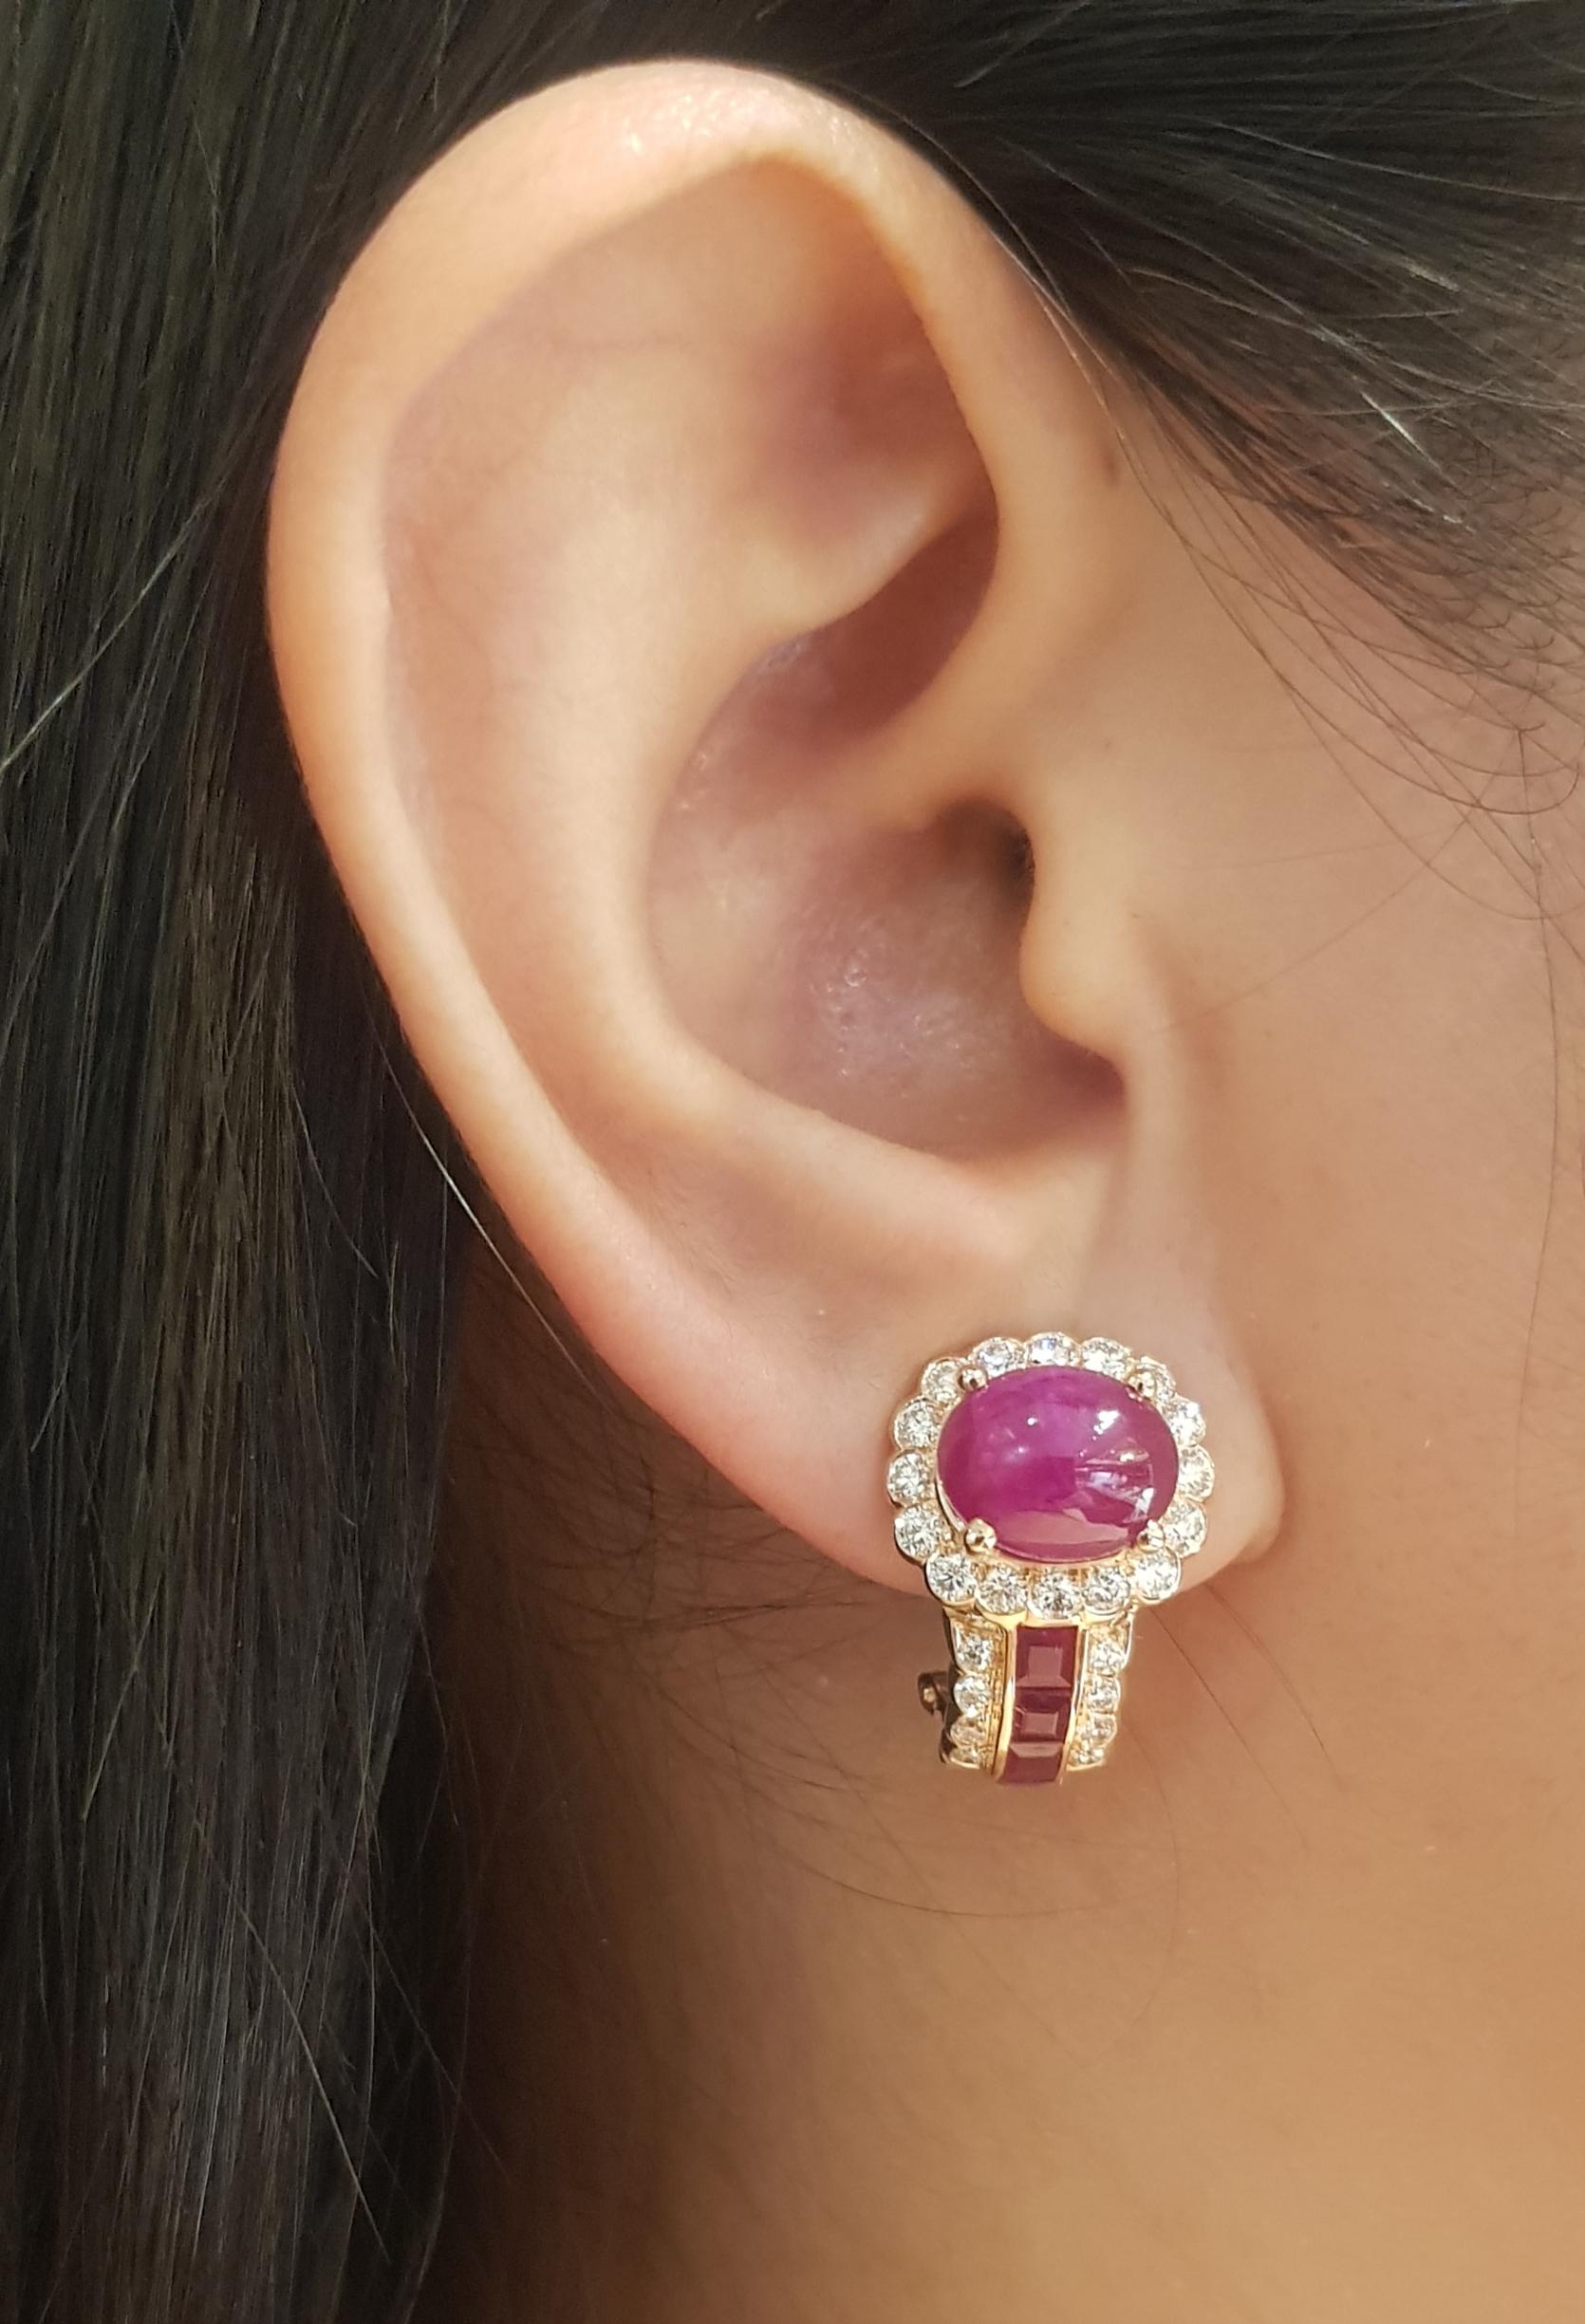 Cabochon Ruby 9.14 carats, Ruby 1.22 carats and Diamond 1.17 carats Earrings set in 18K Rose Gold Settings

Width: 1.4 cm 
Length: 2.0 cm
Total Weight: 12.20 grams

